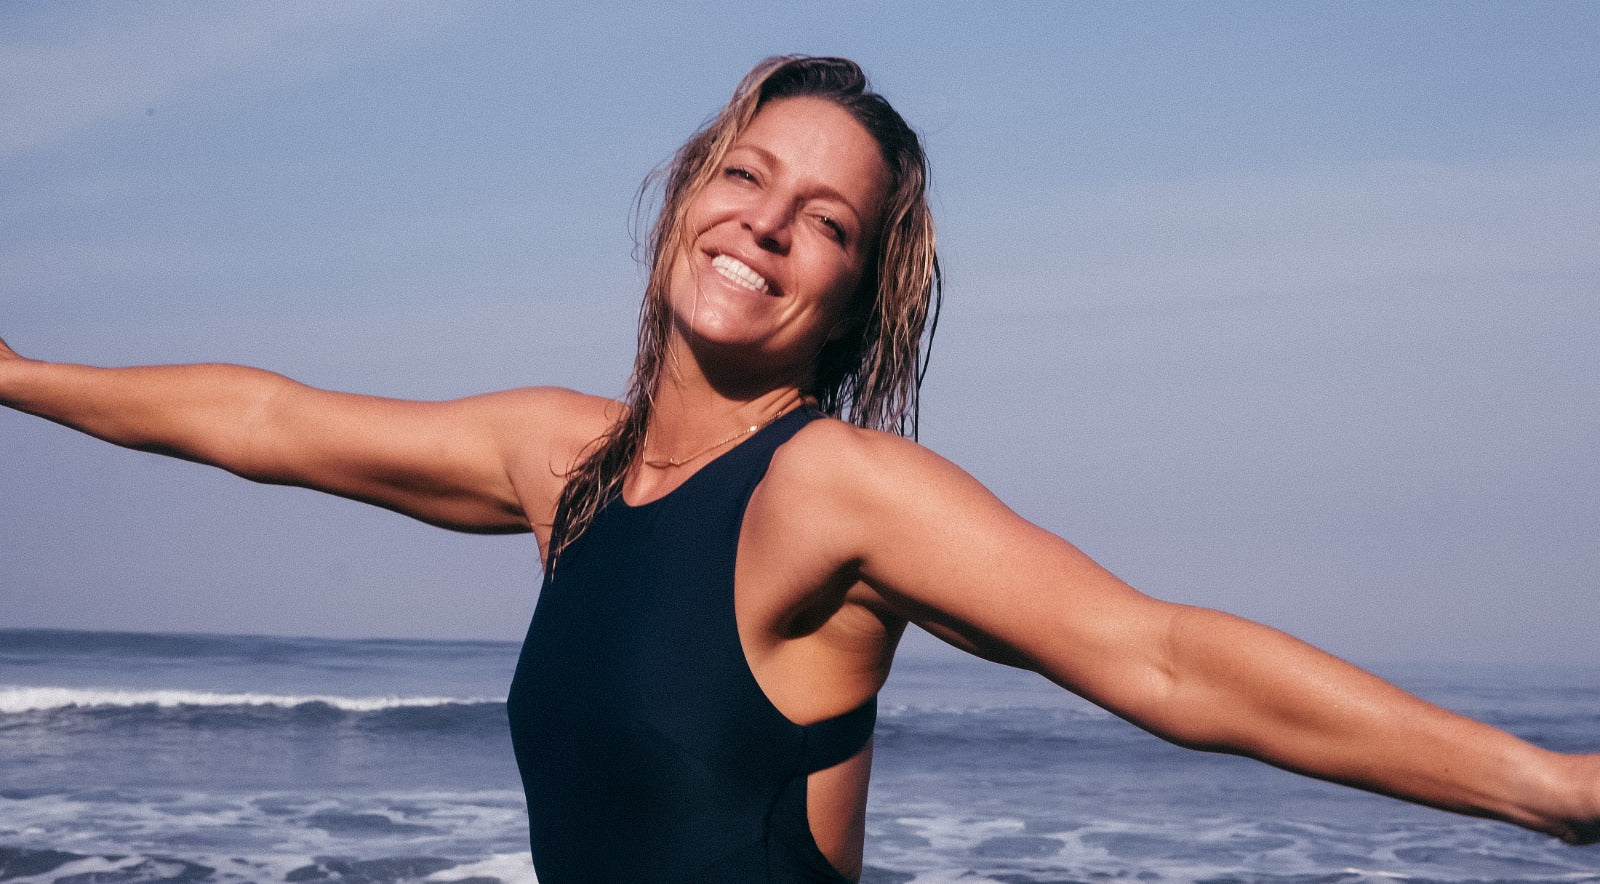 Interview to Jess and the ocean in our new criss-cross one piece sustainable surf swimsuit. Canggu